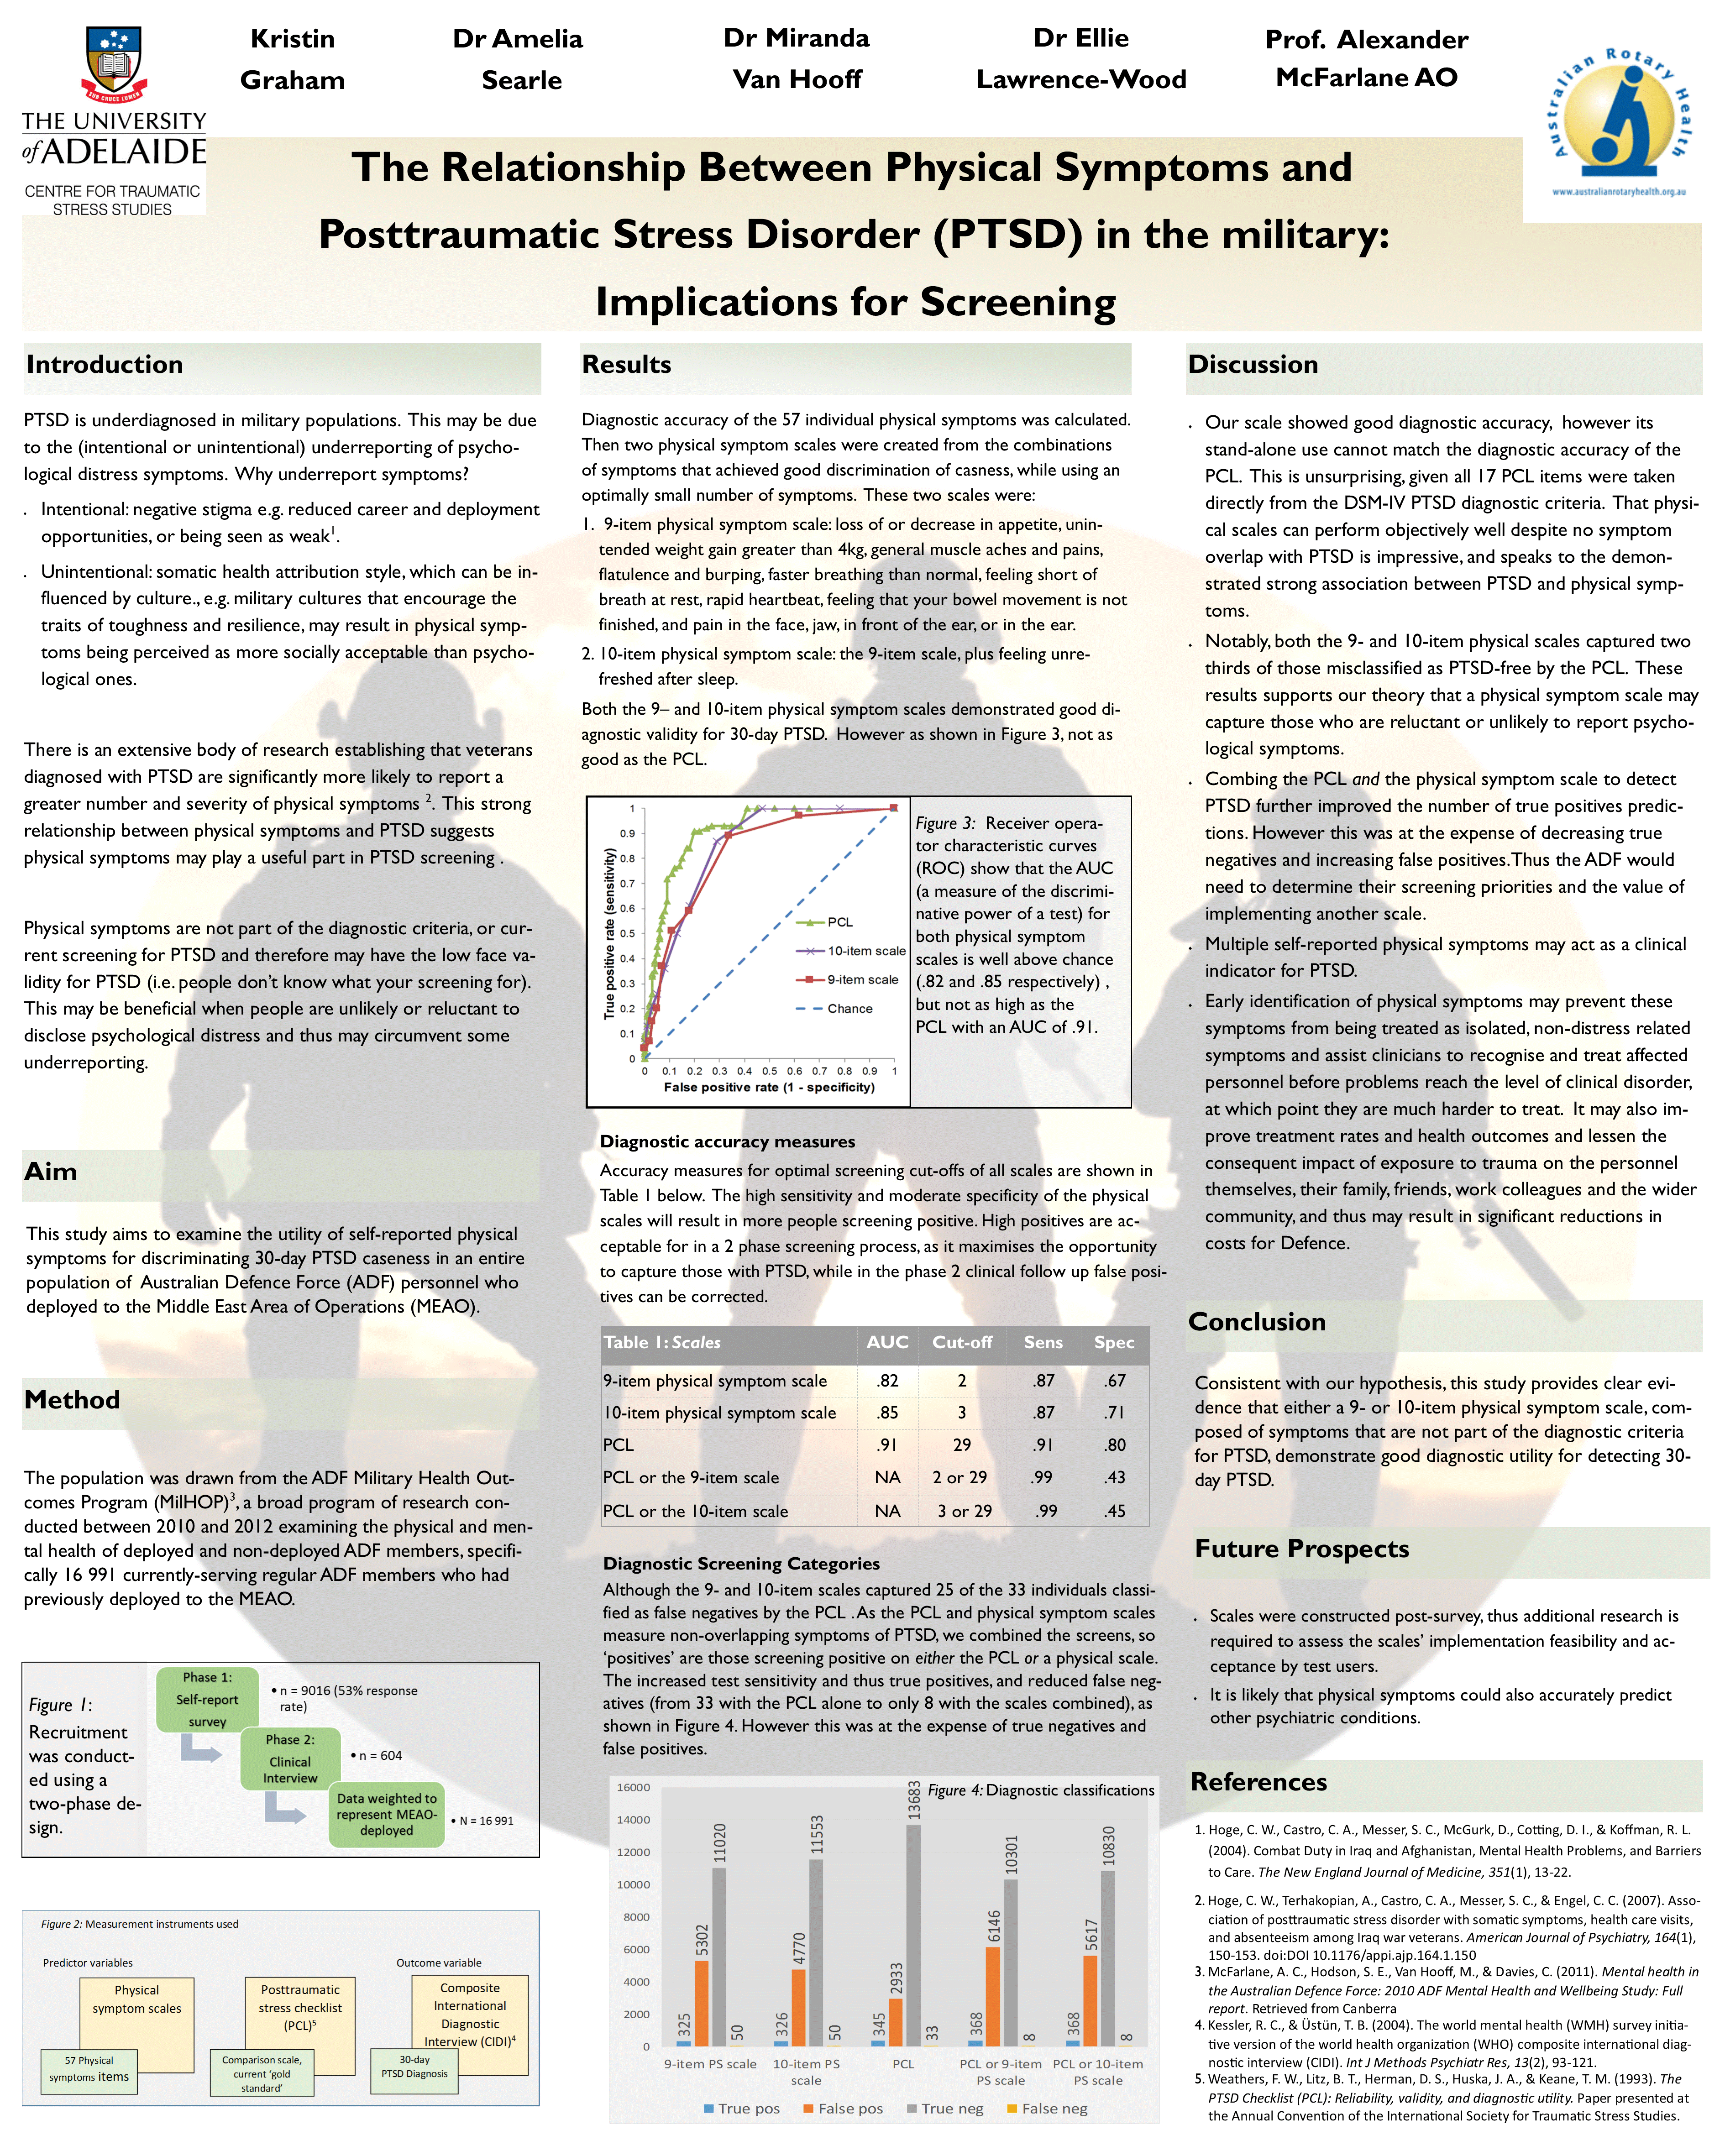 Poster presented at the 10th Flory Postgraduate Conference, Adelaide, South Australia, 2017